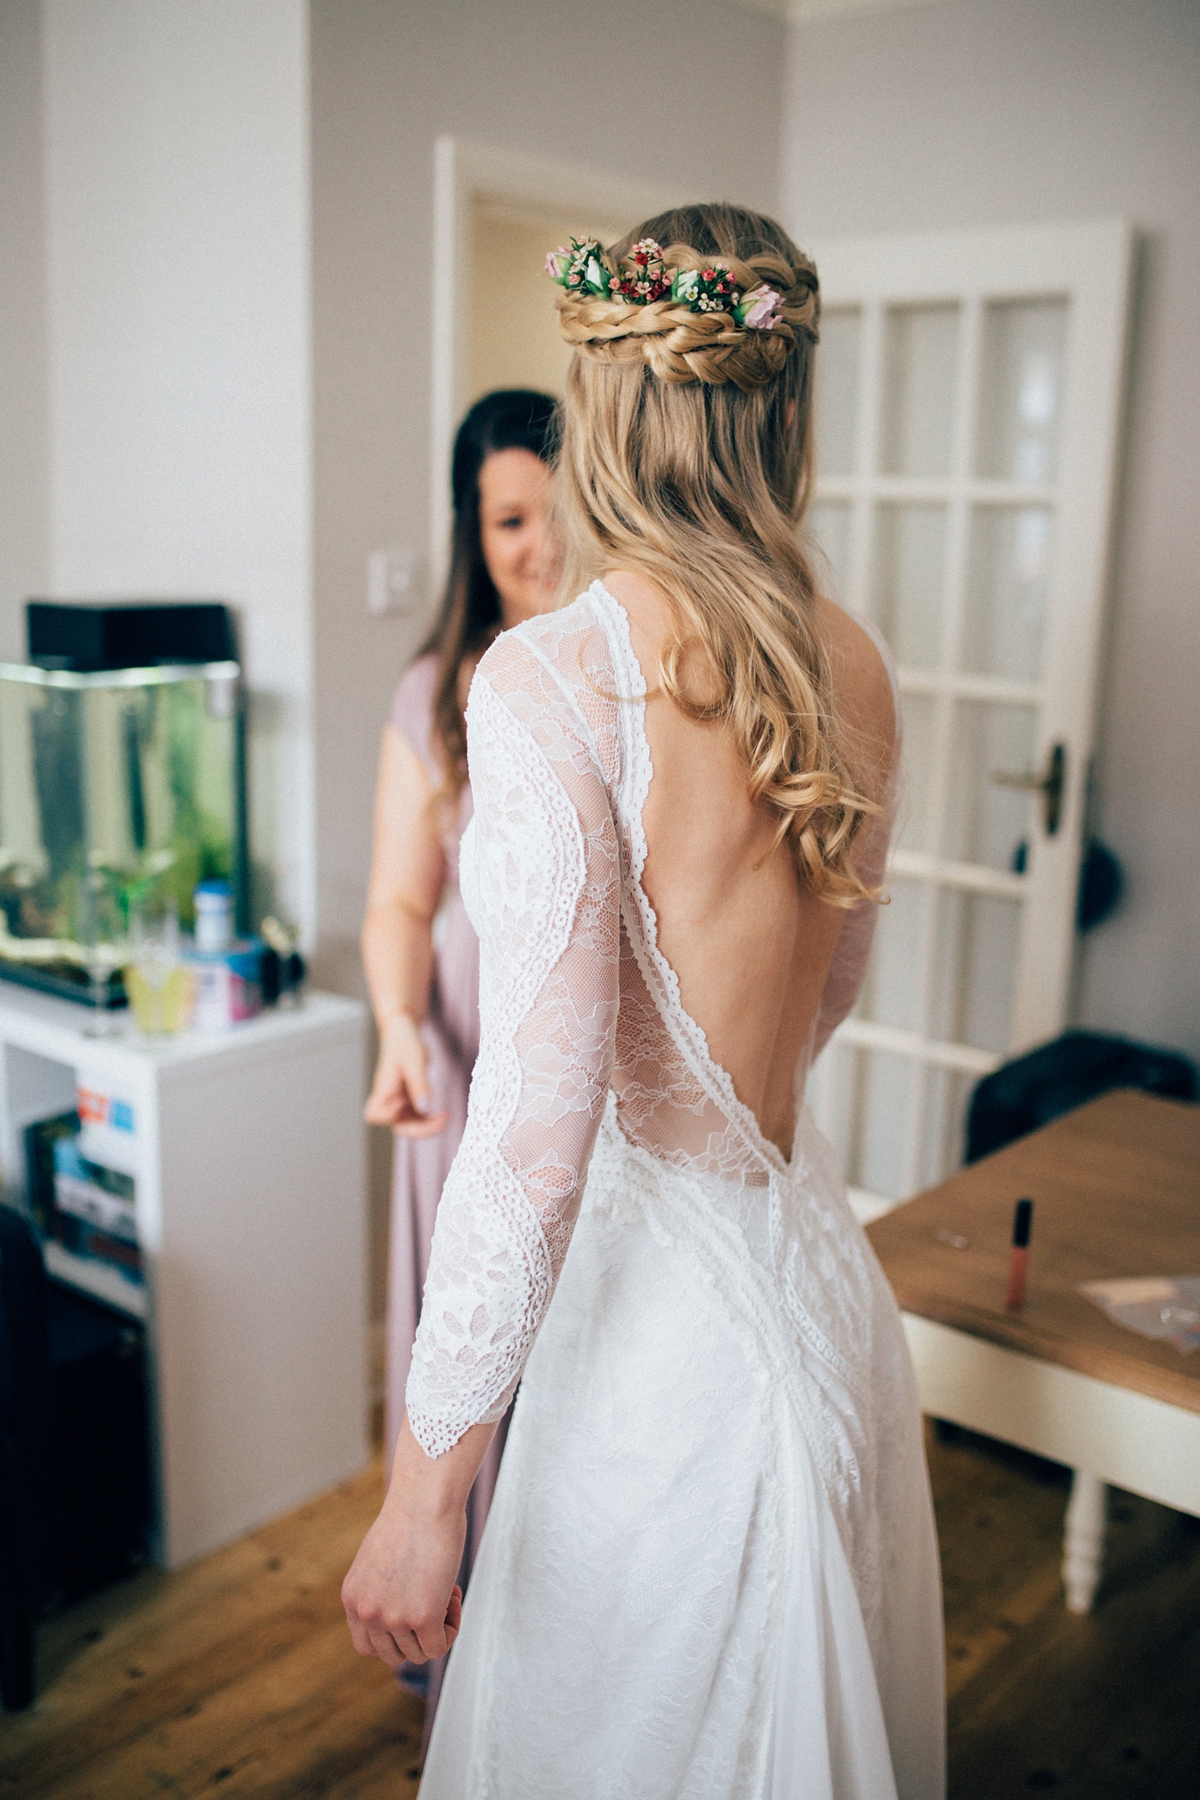 8 A Grace Loves Lace gown for a woodland inspired London pub wedding. Images by Nikki van der Molen